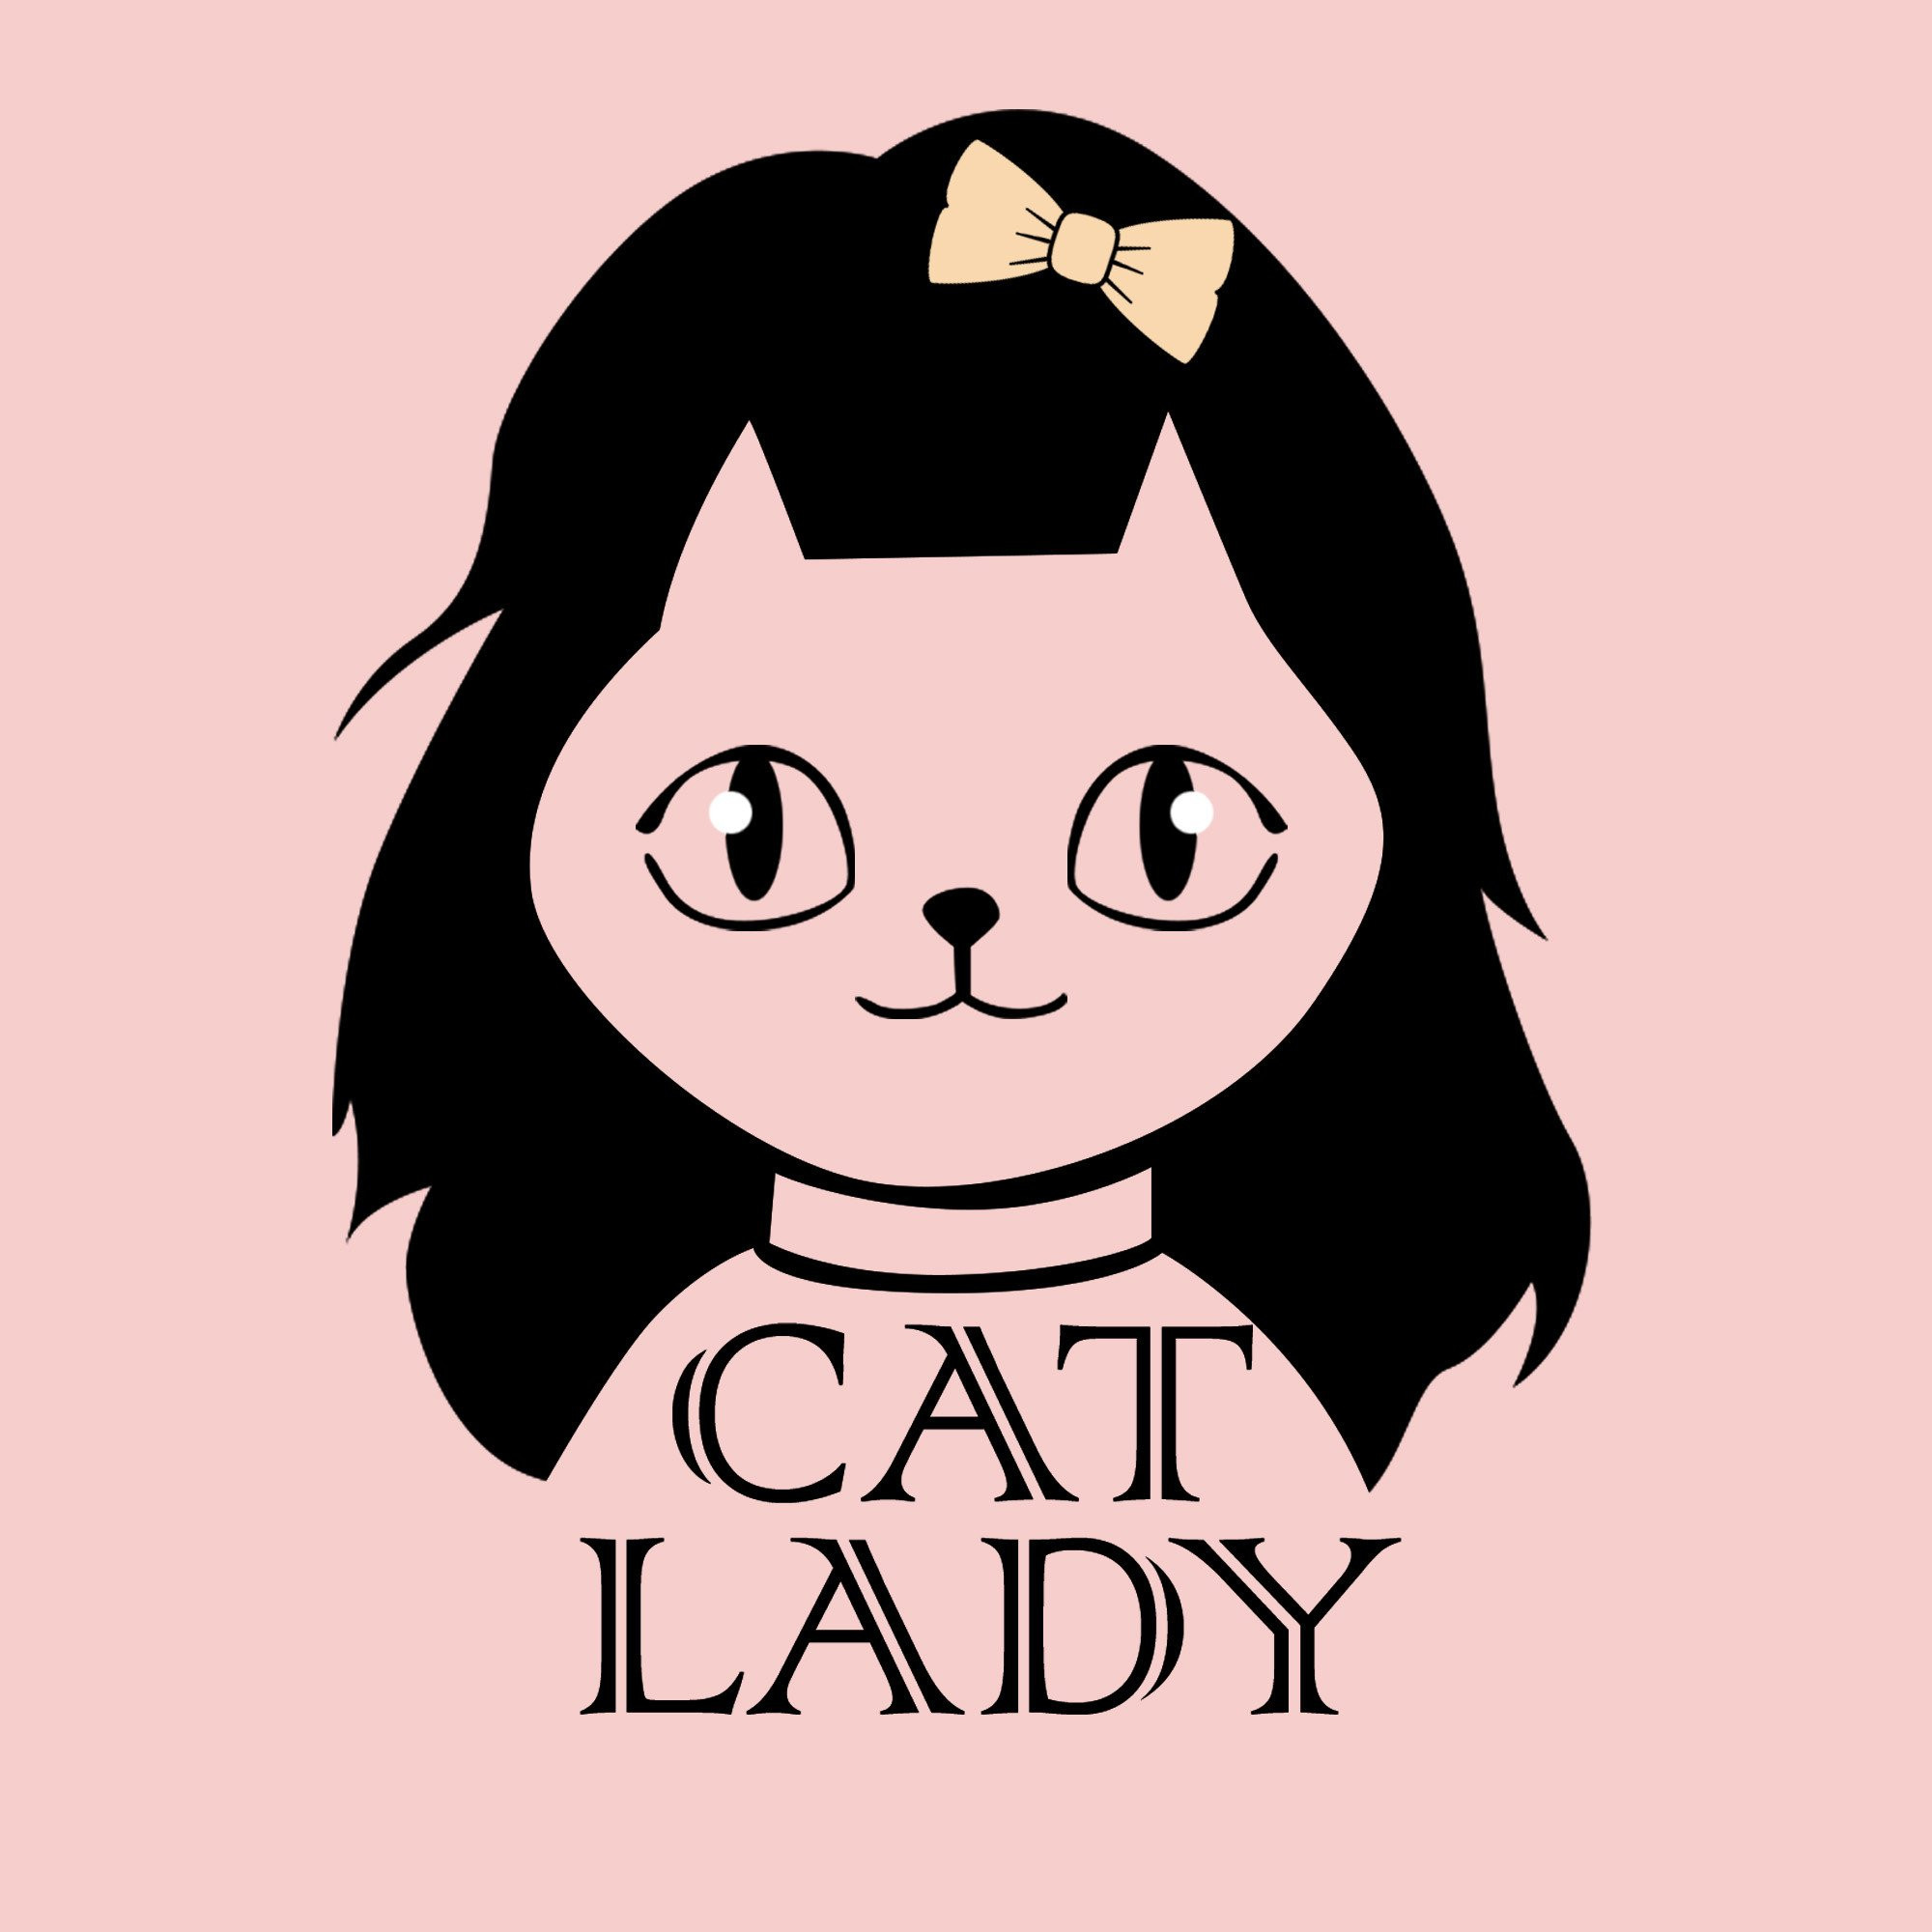 Cat Lady's profile picture